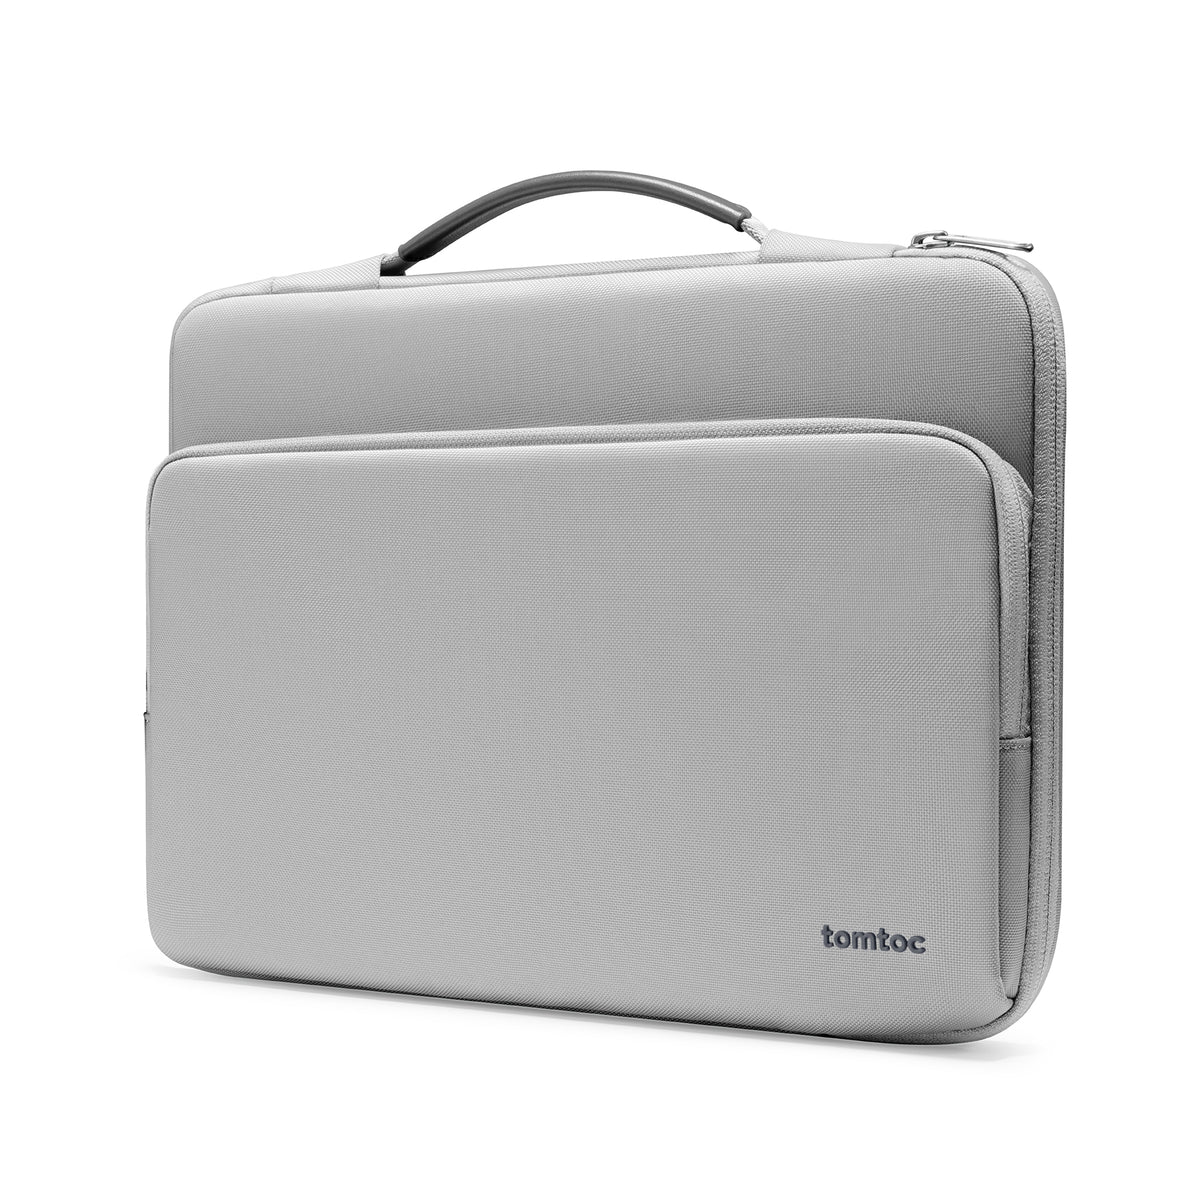 tomtoc 15 Inch Versatile 360 Protective Laptop Sleeve Briefcase - Gray